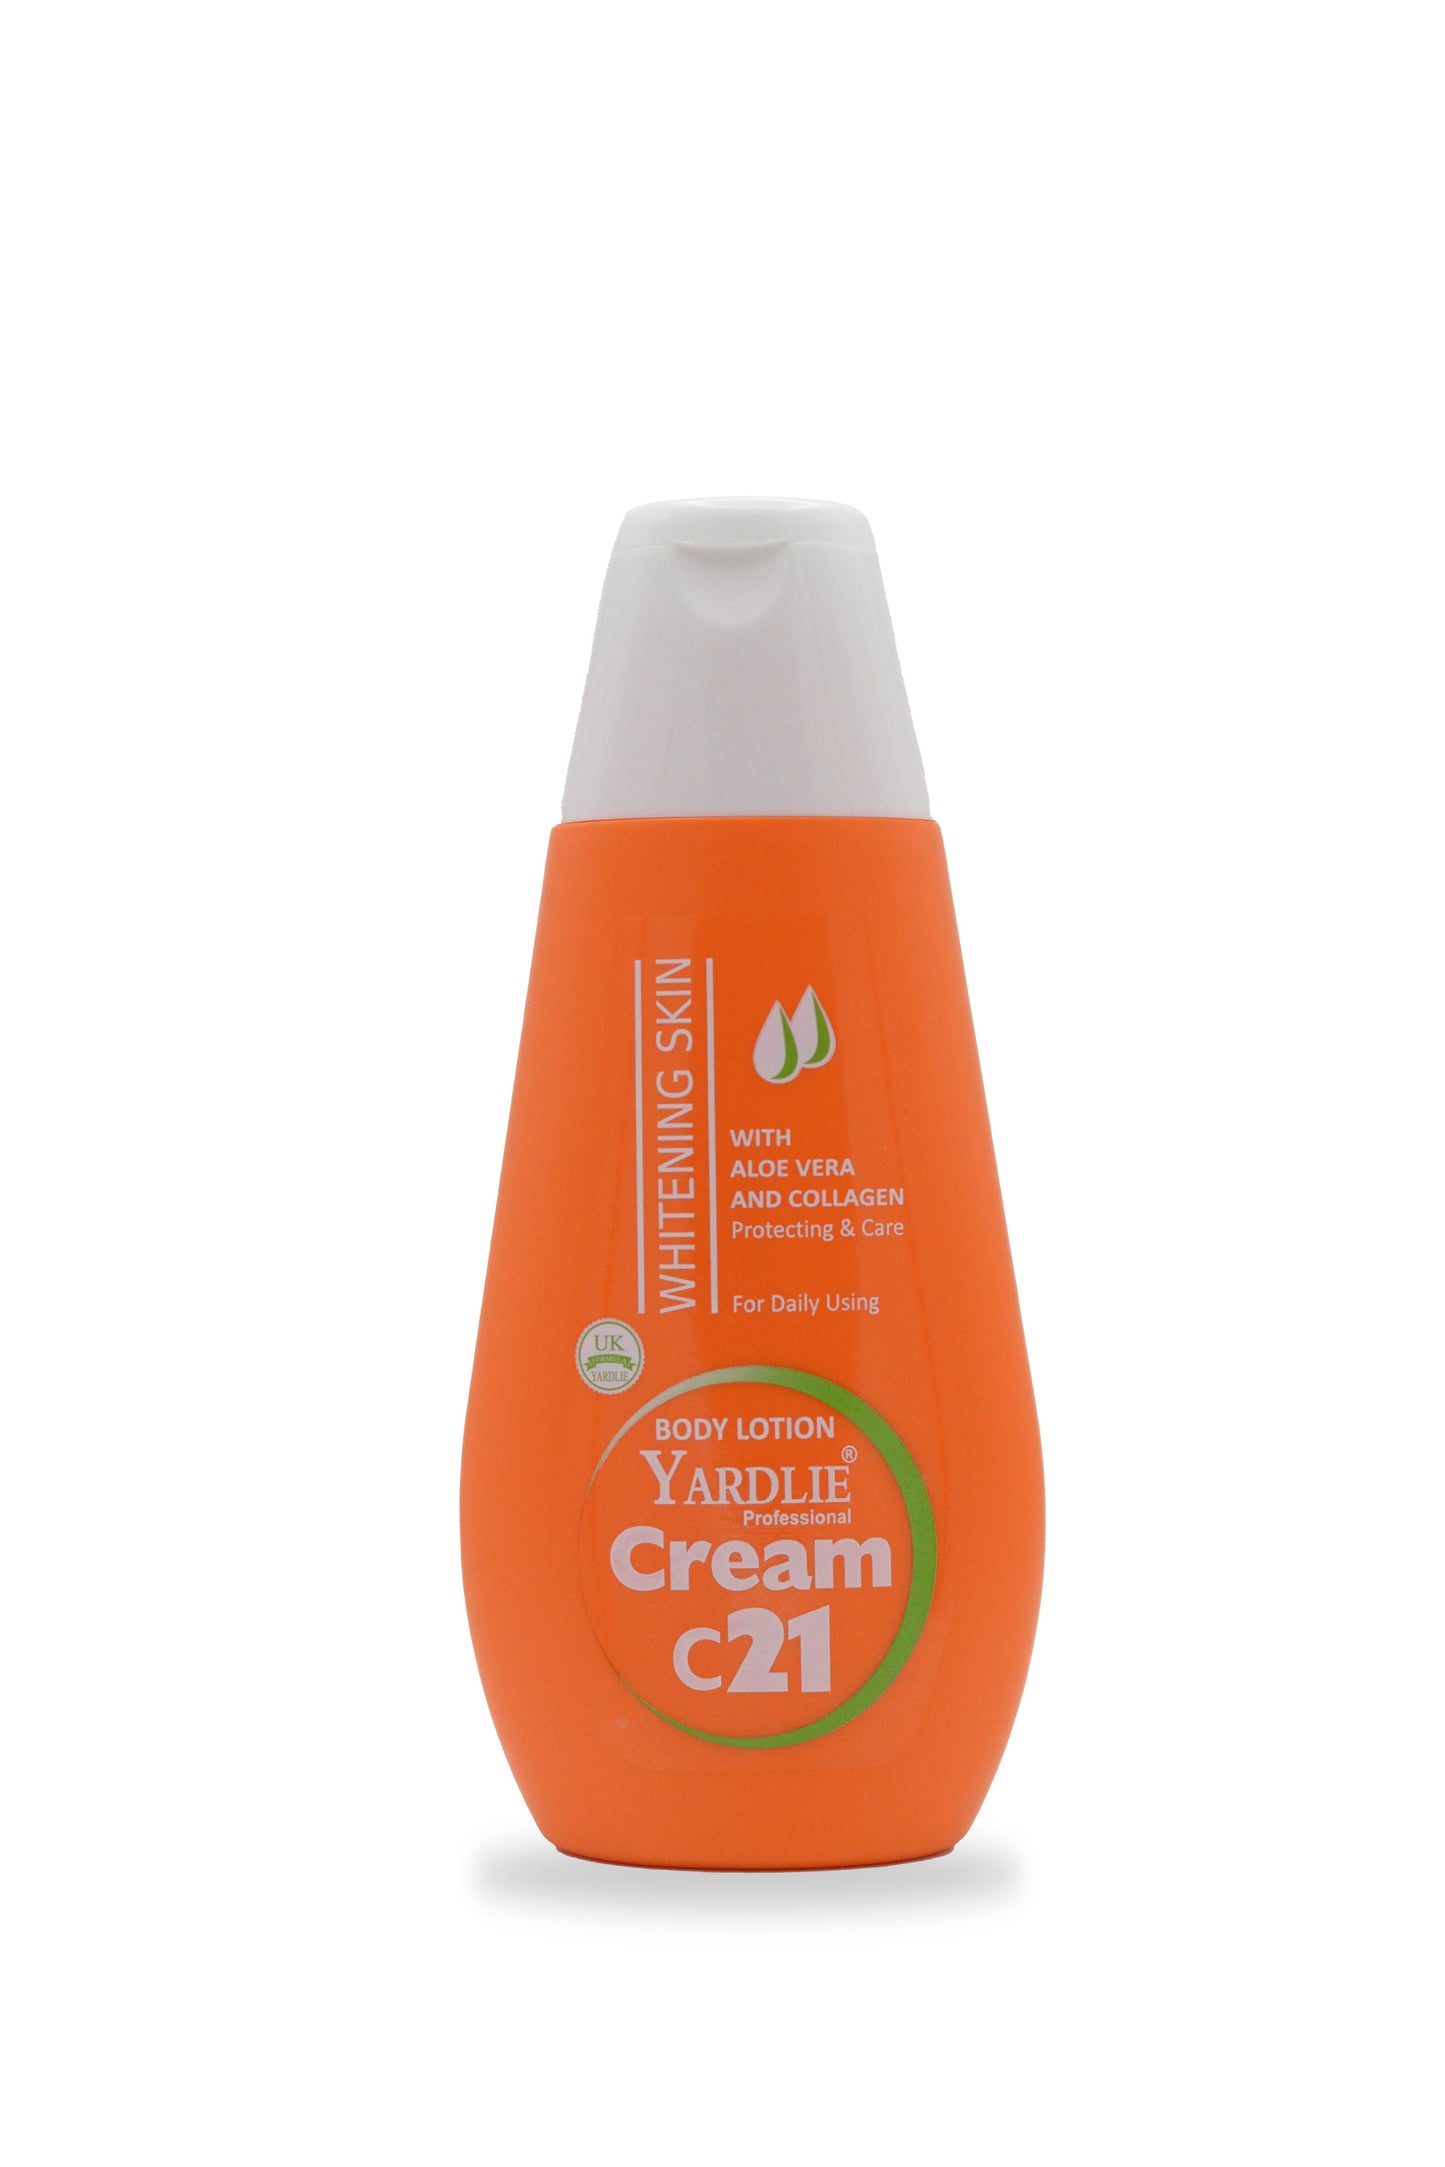 Yardlie C21 Lotion with Aloe Vera and Collagen 200g.